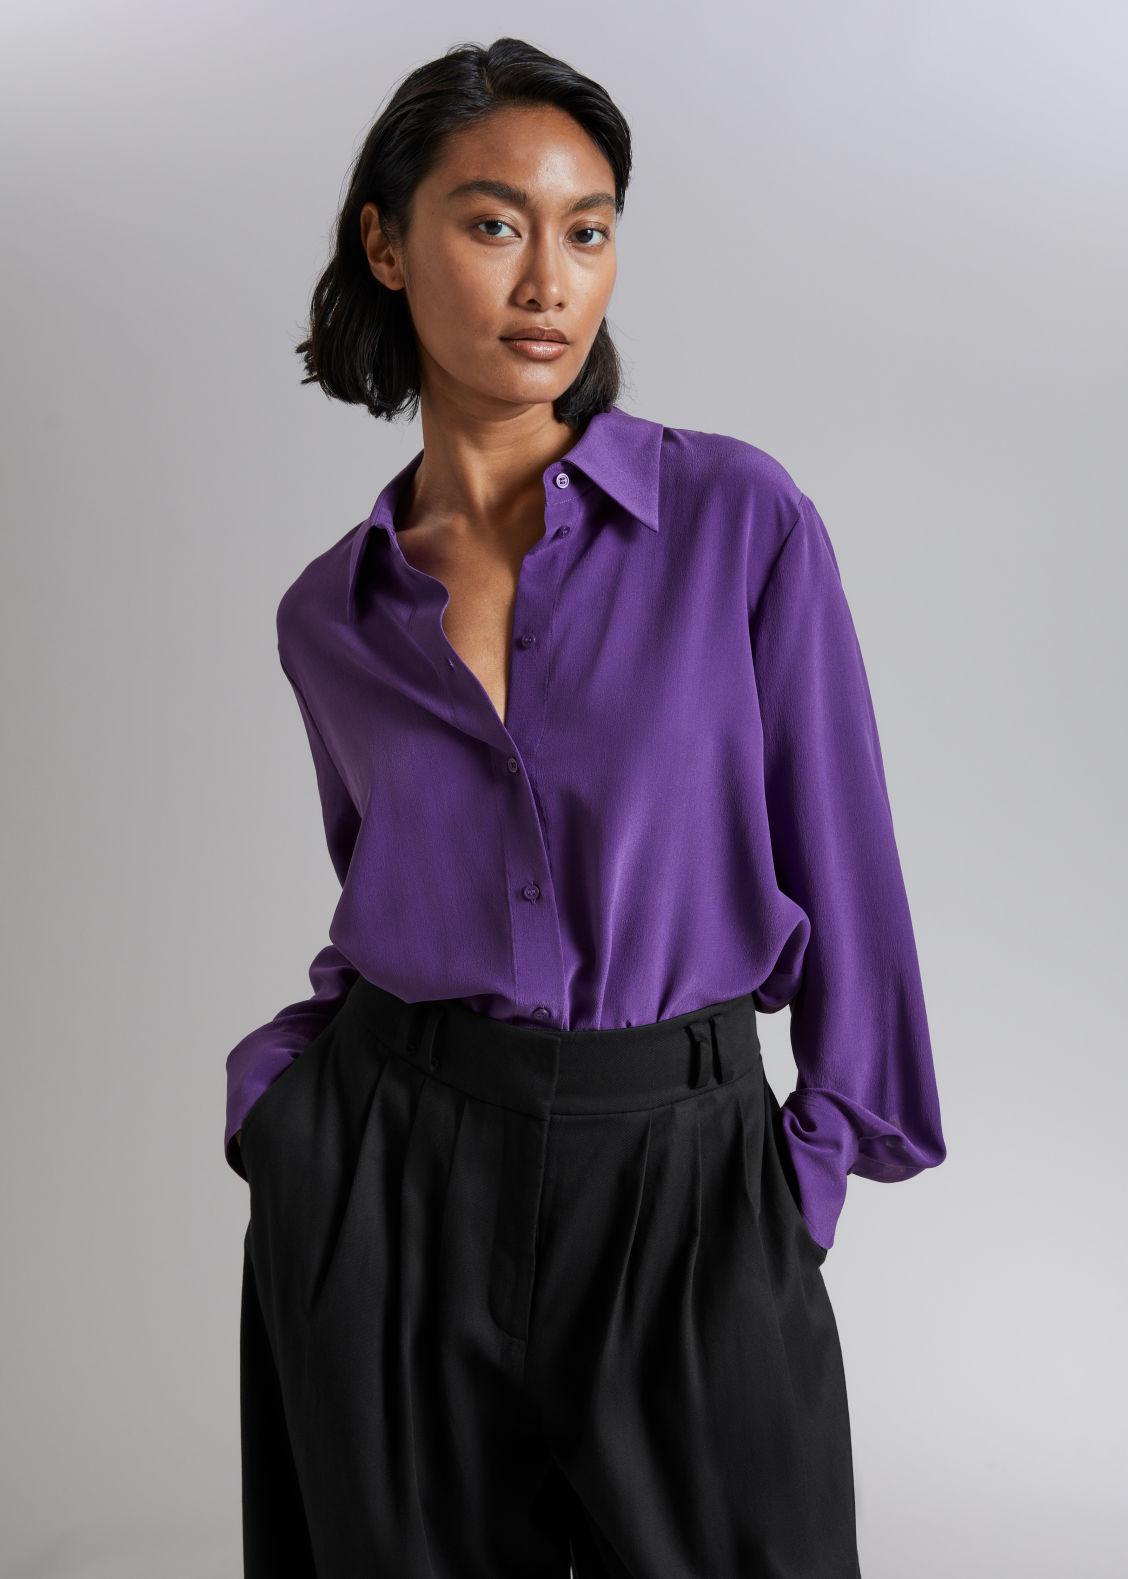 & Other Stories Mulberry Silk Shirt in Purple | Lyst